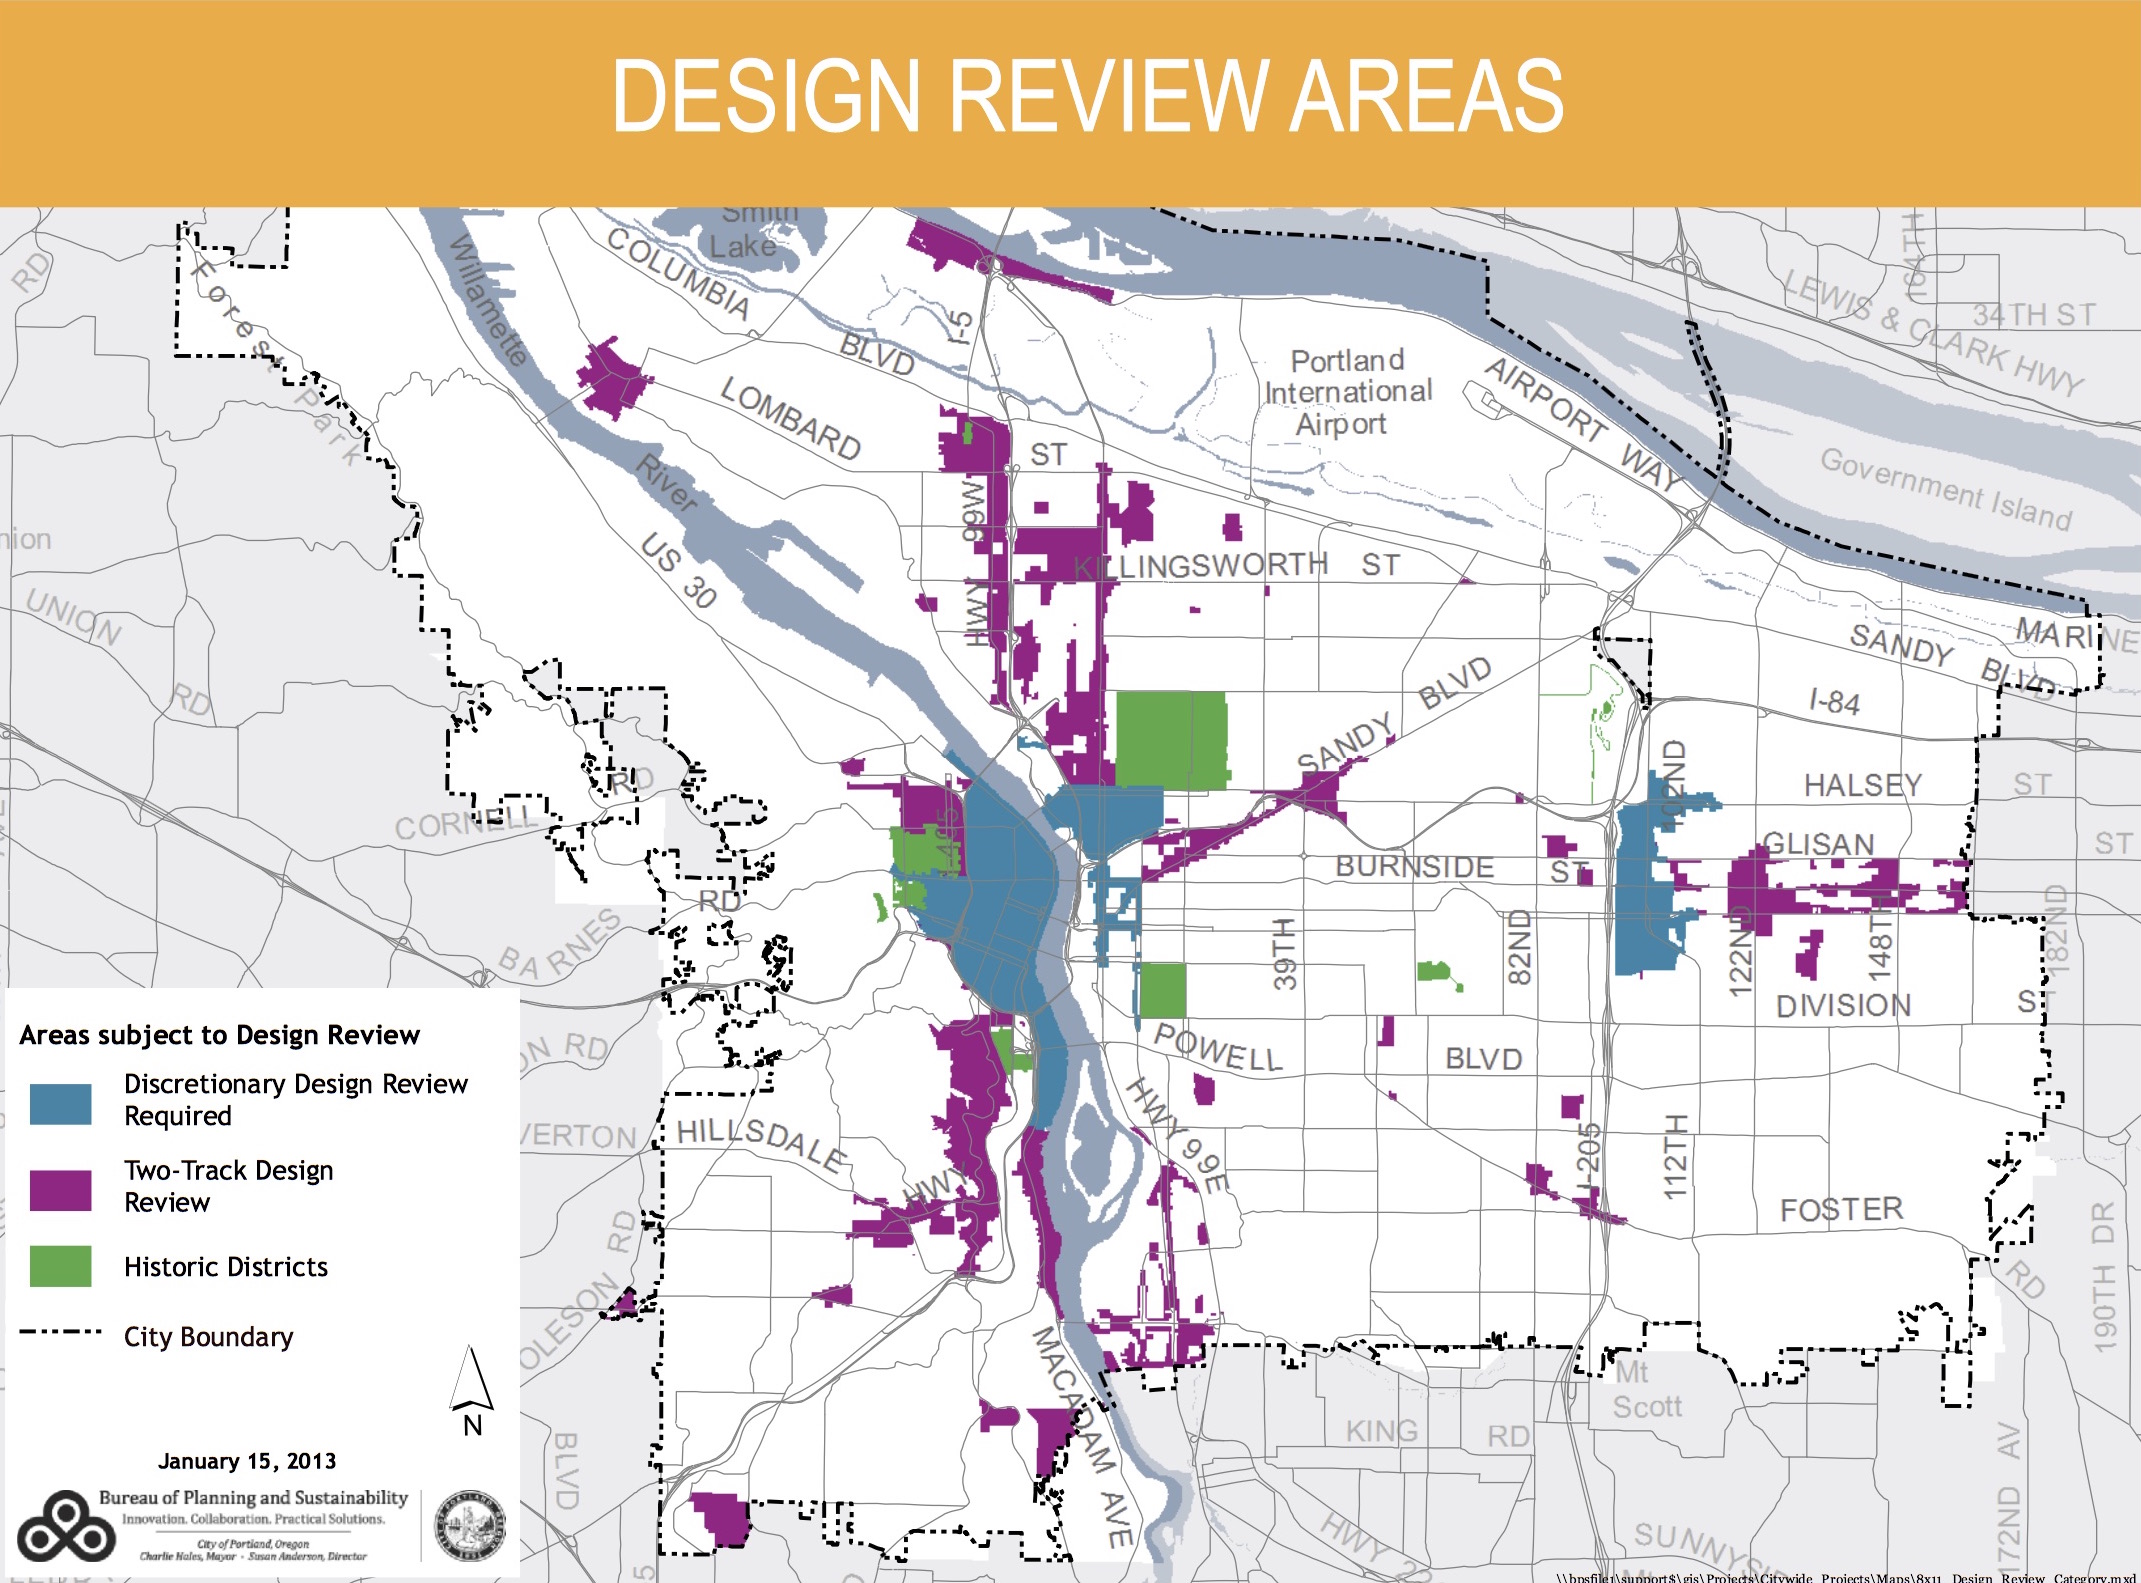 Areas of the city subject to Design Review. With some exceptions, the Design Commission reviews projects in the blue areas. Projects in the purple areas typically only come before the Design Commission if they are appealed. Areas in white are not subject to Design Review.